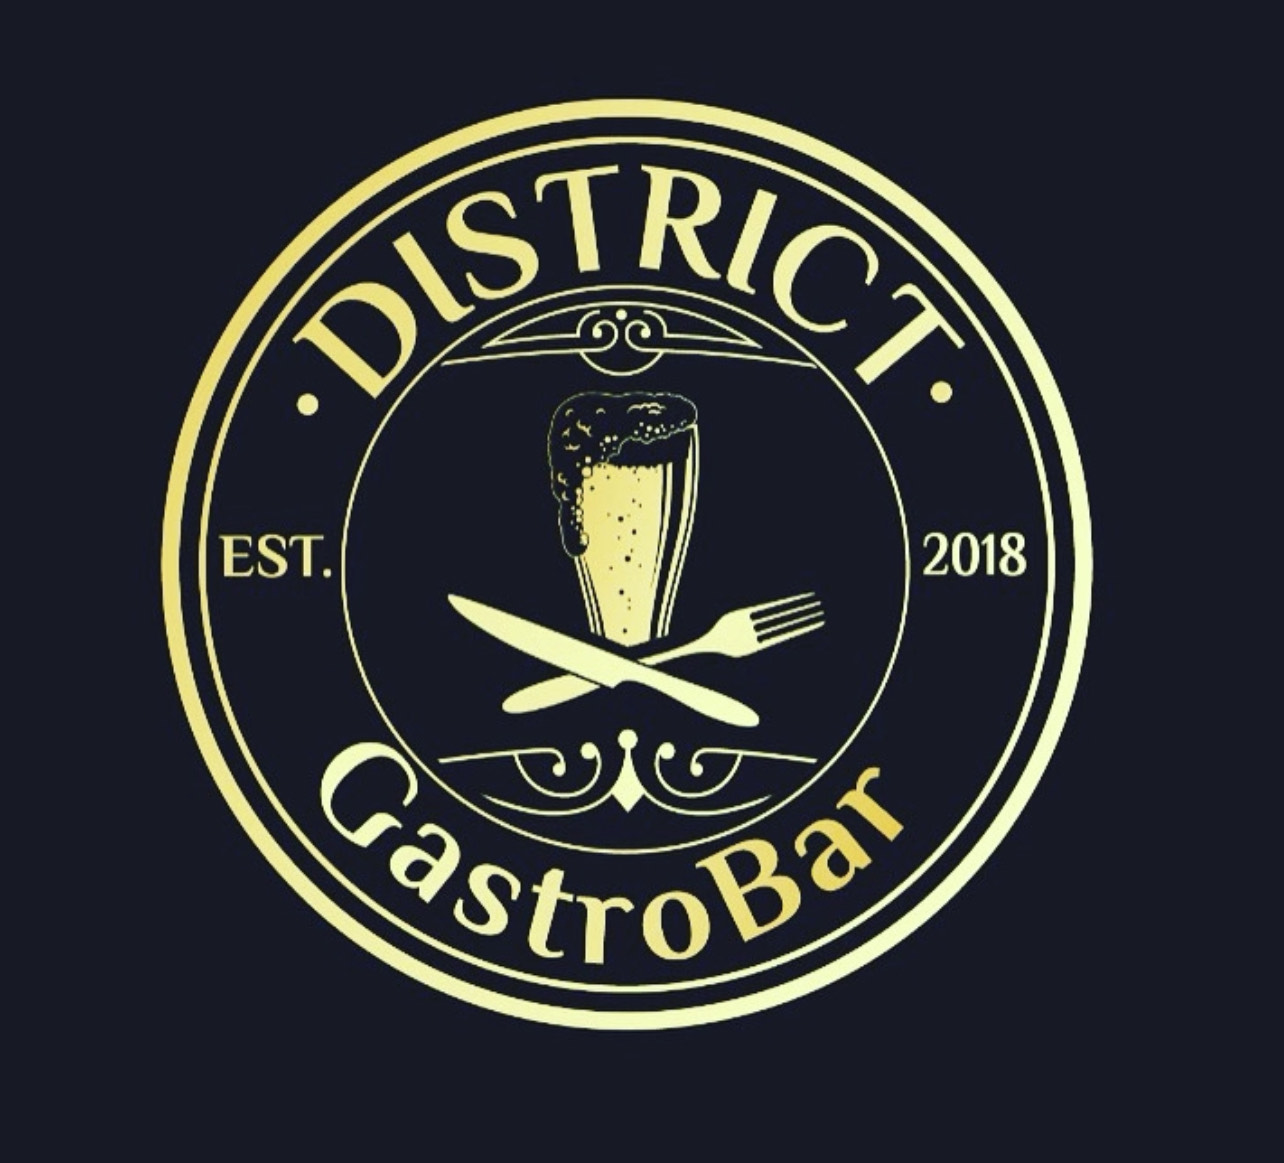 The District Gastrobar Home